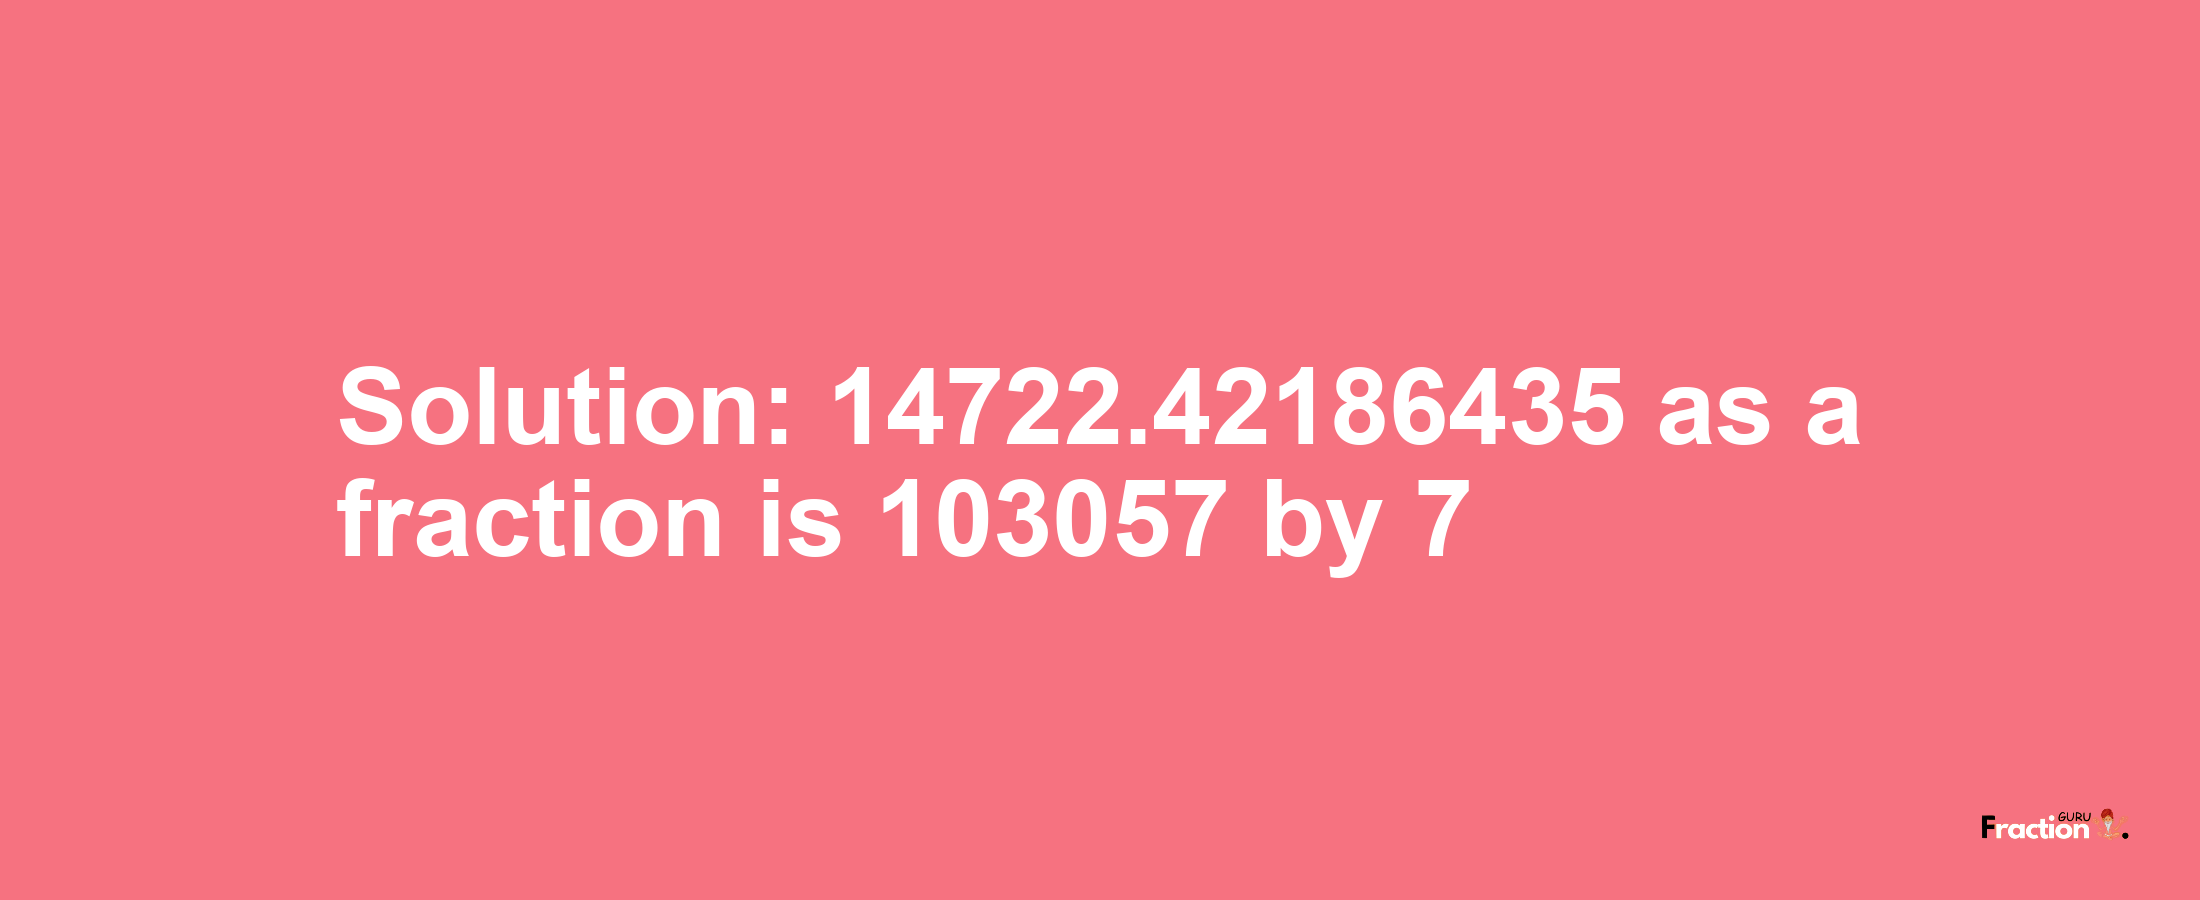 Solution:14722.42186435 as a fraction is 103057/7